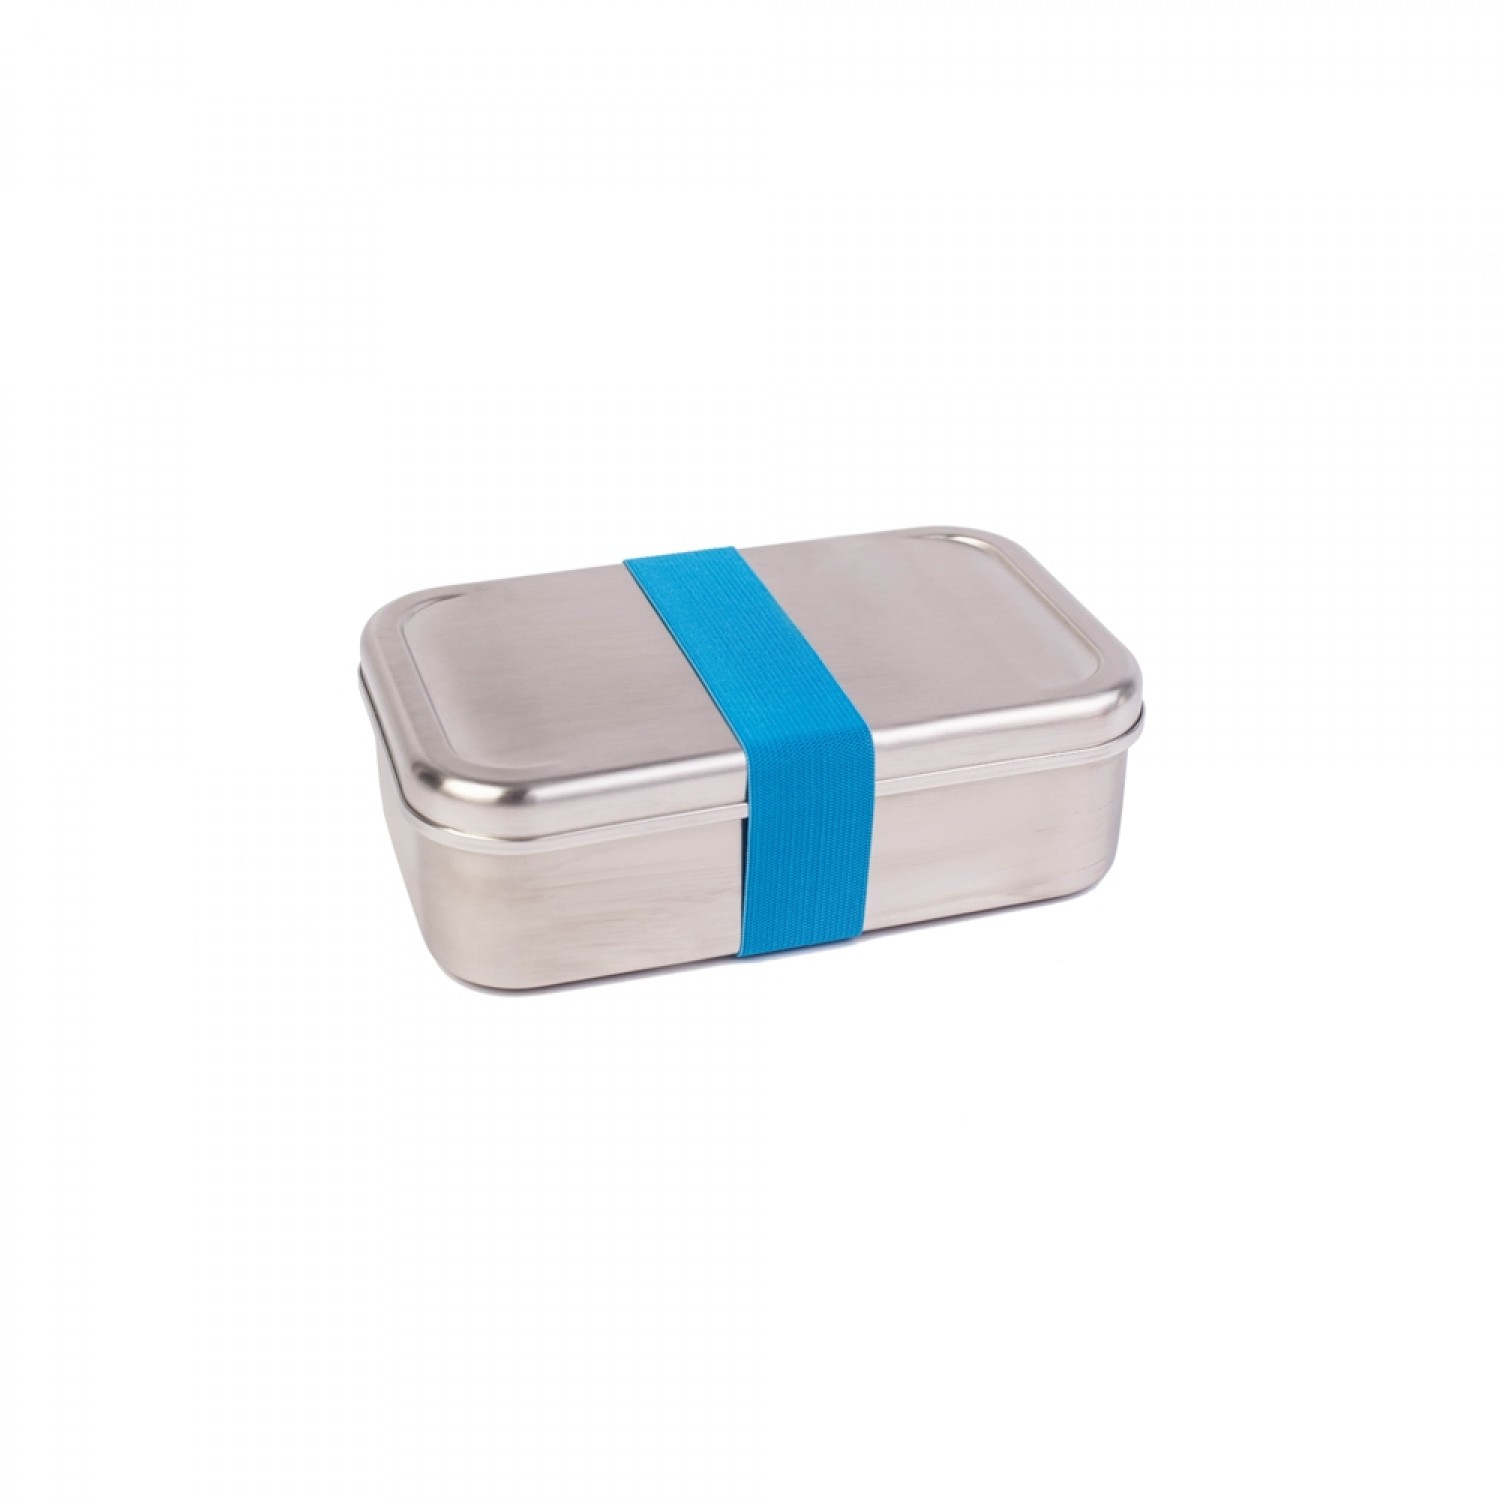 Premium Lunch Box Stainless Steel with colourful strap | Tindobo